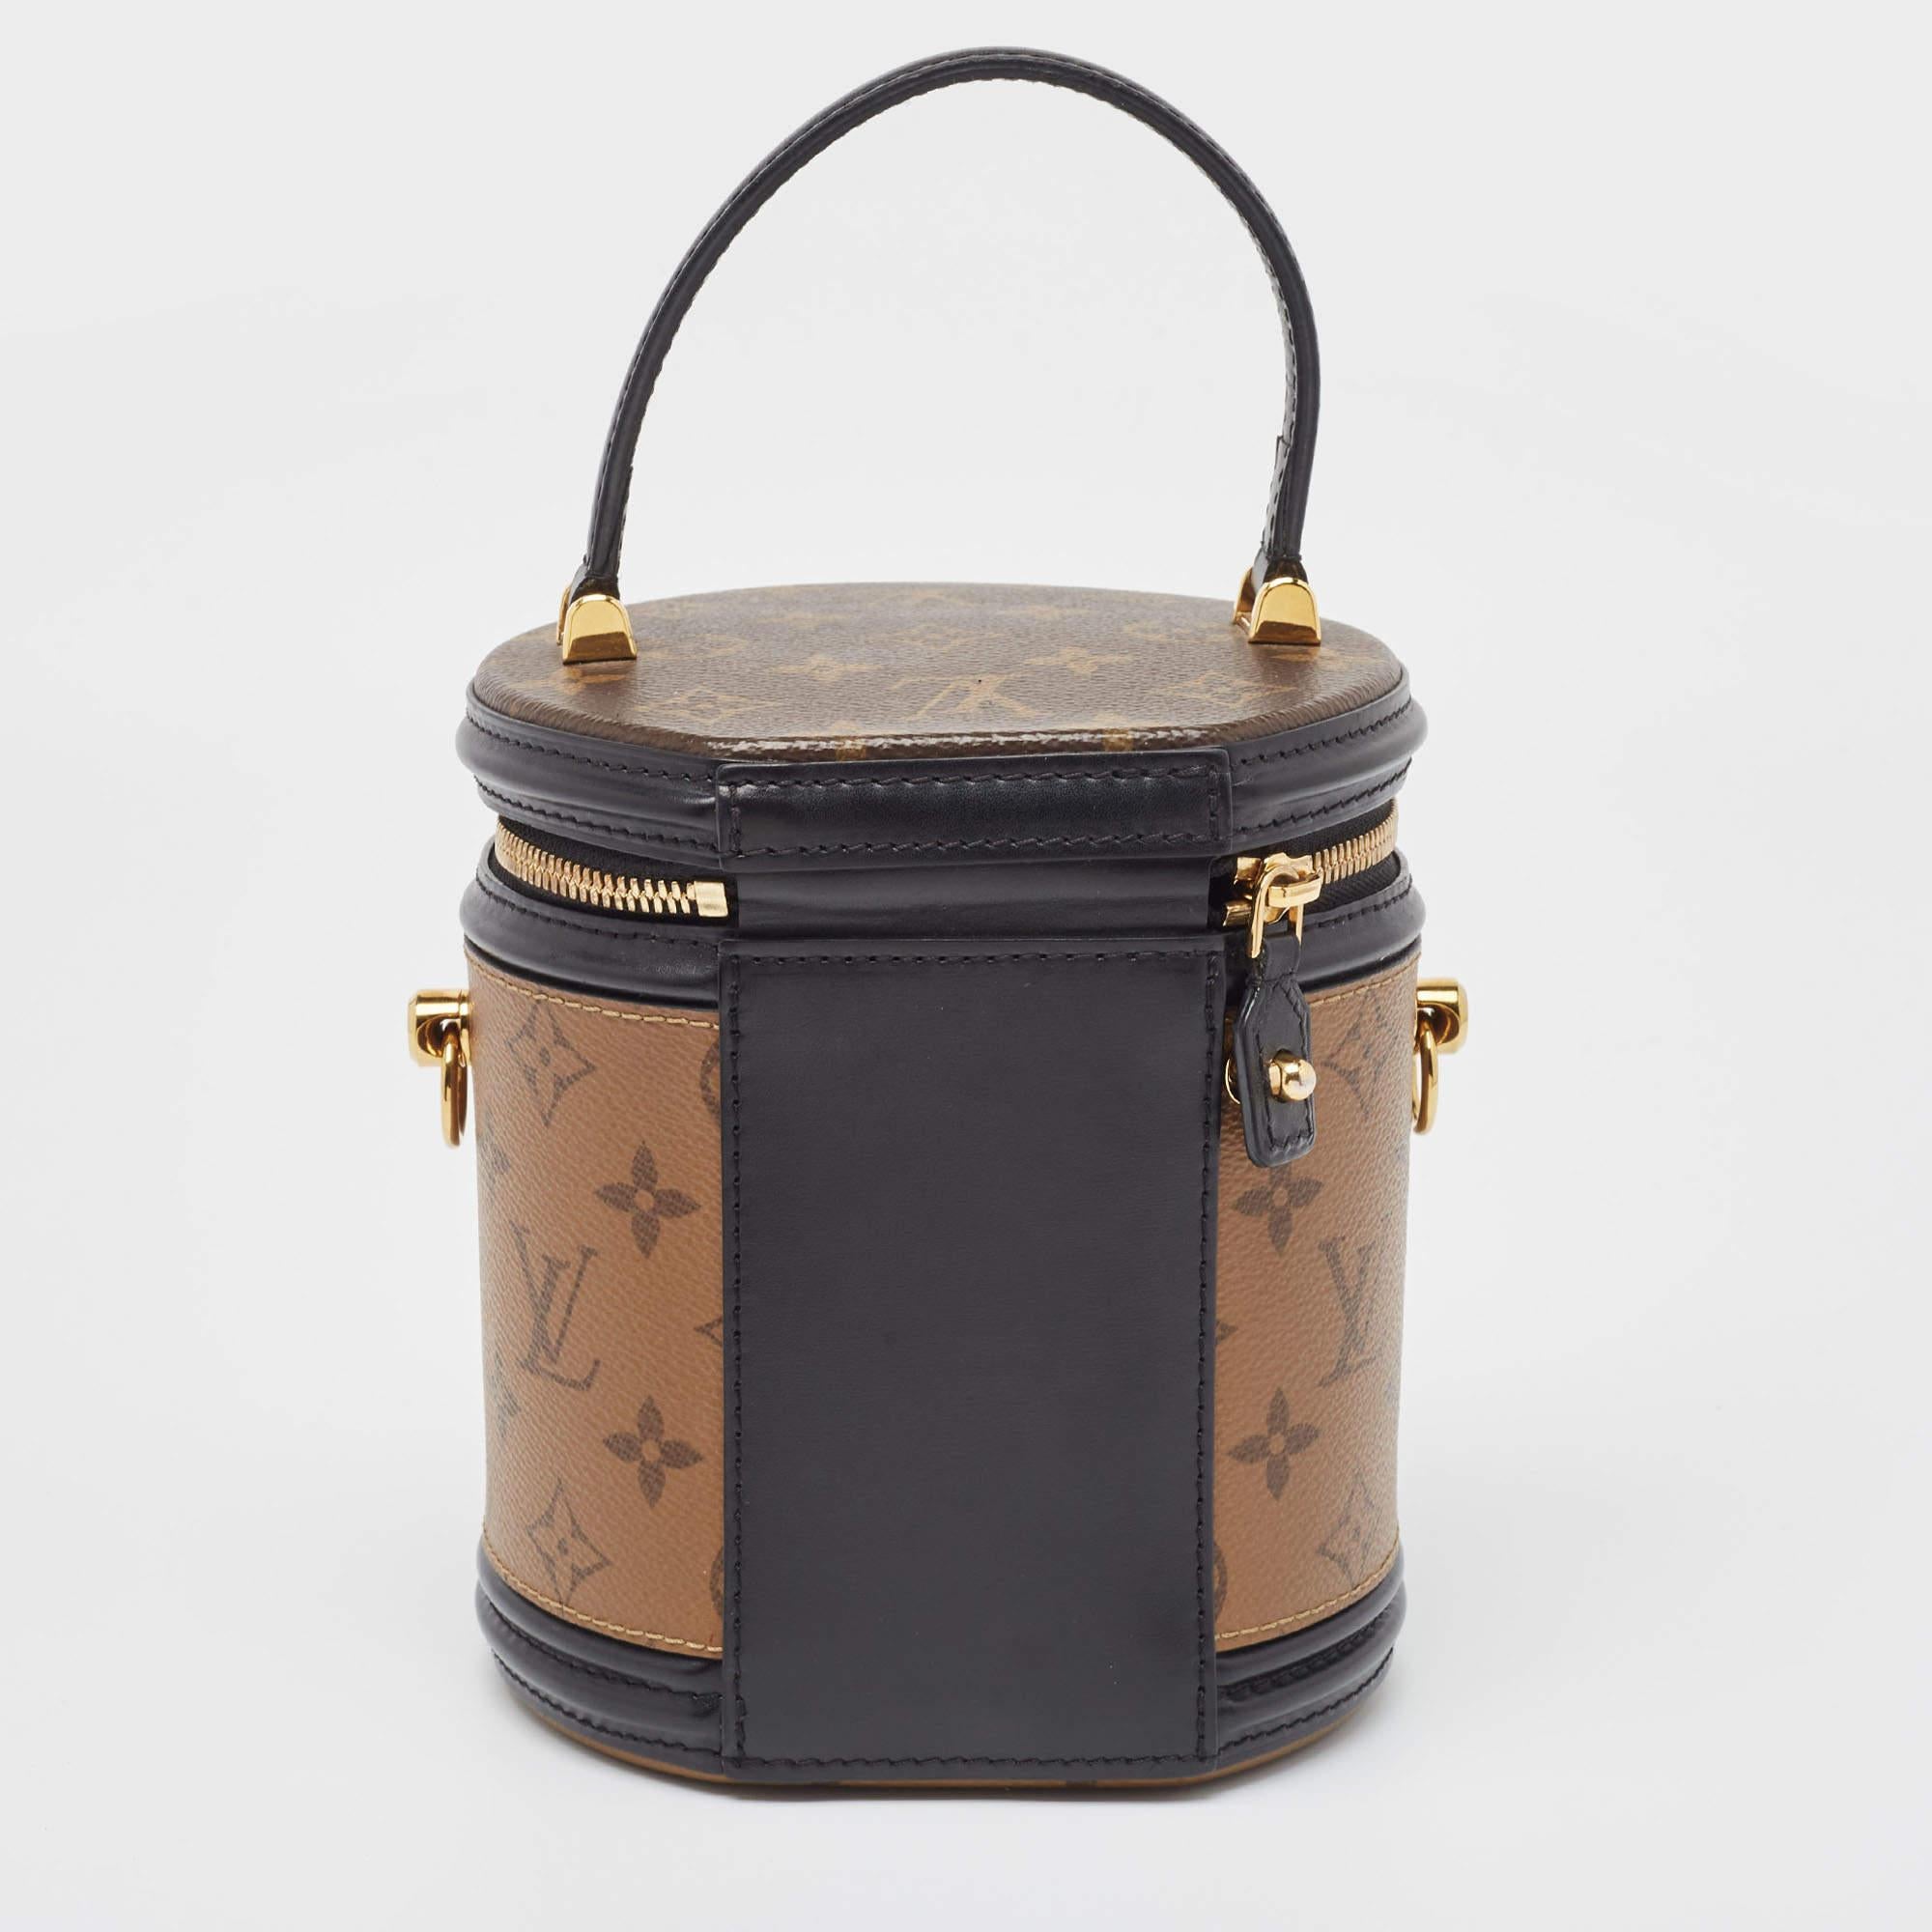 Louis Vuitton's creations are popular owing to their high style and functionality. This Cannes bag, like all the other handbags, is durable and stylish. Exuding a fine finish, the bag is designed to give a luxurious experience. The interior has